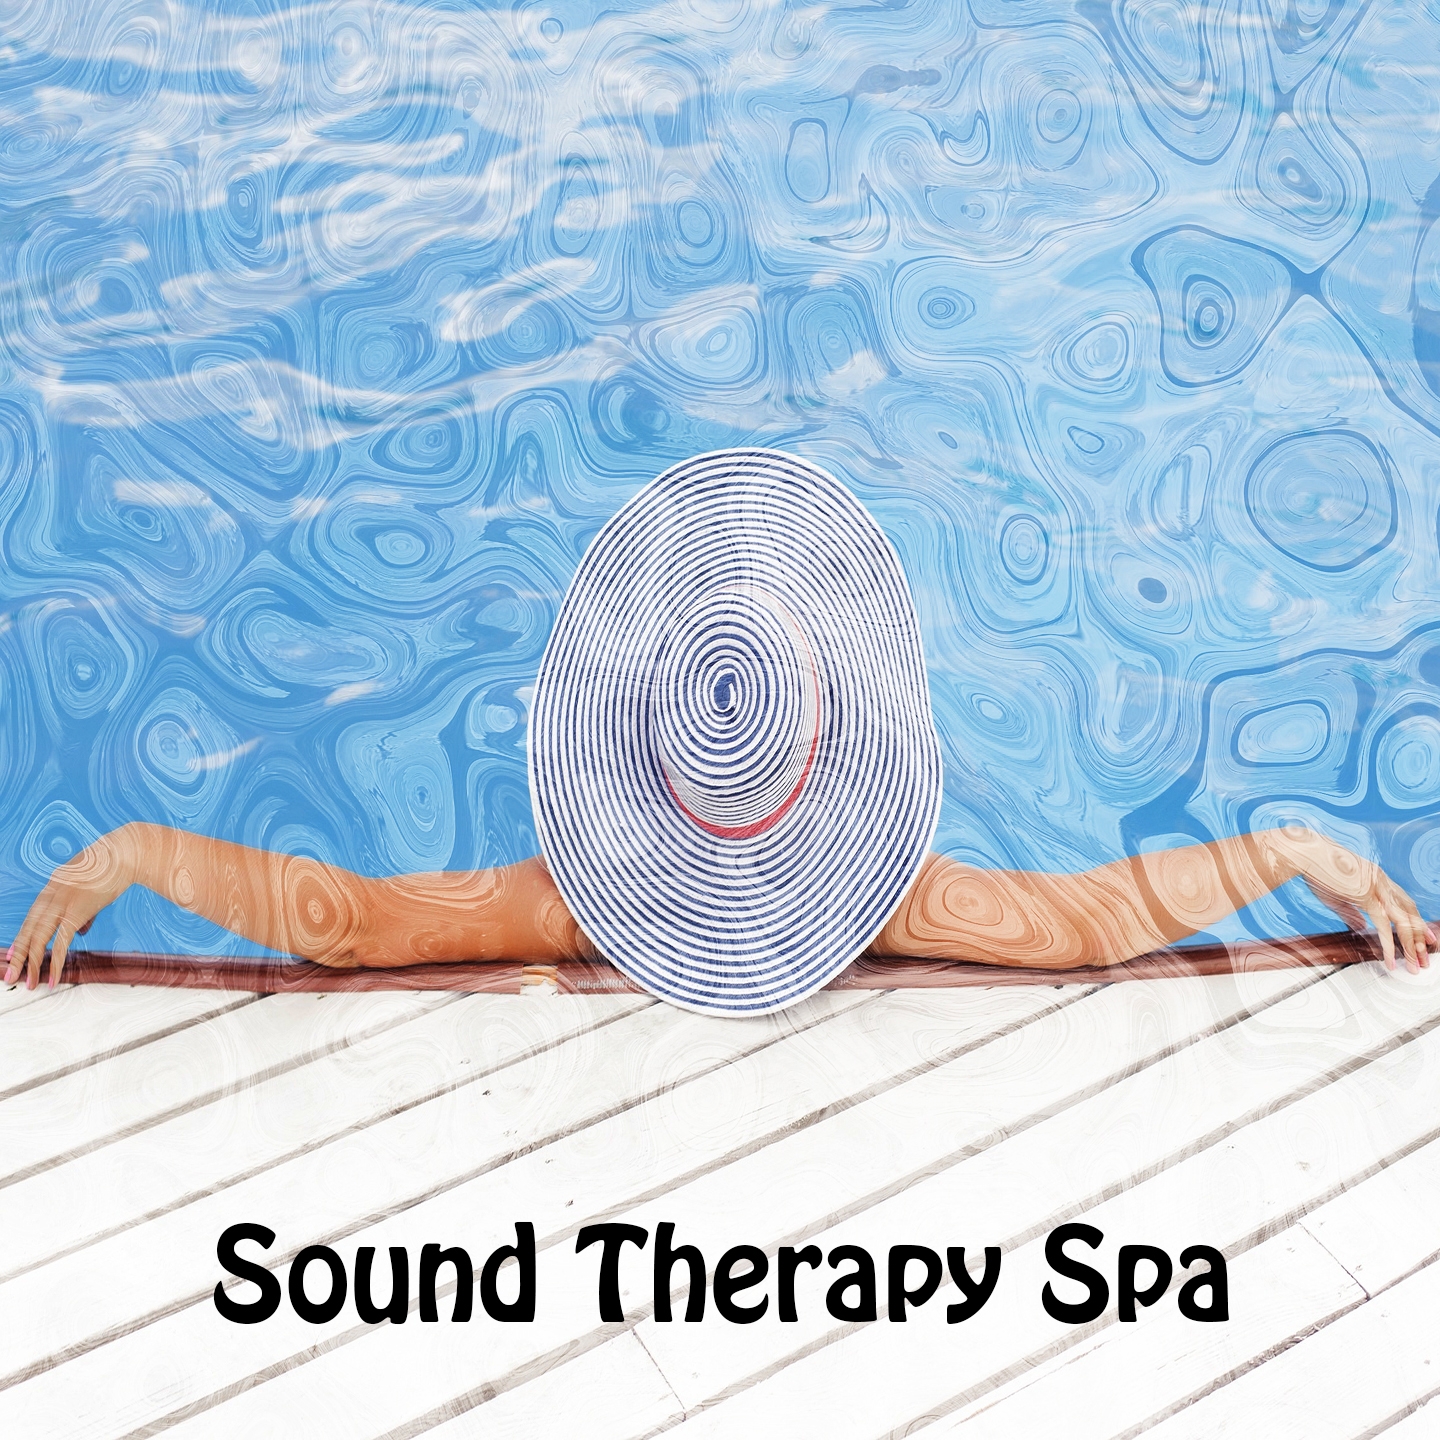 Sound Therapy Spa